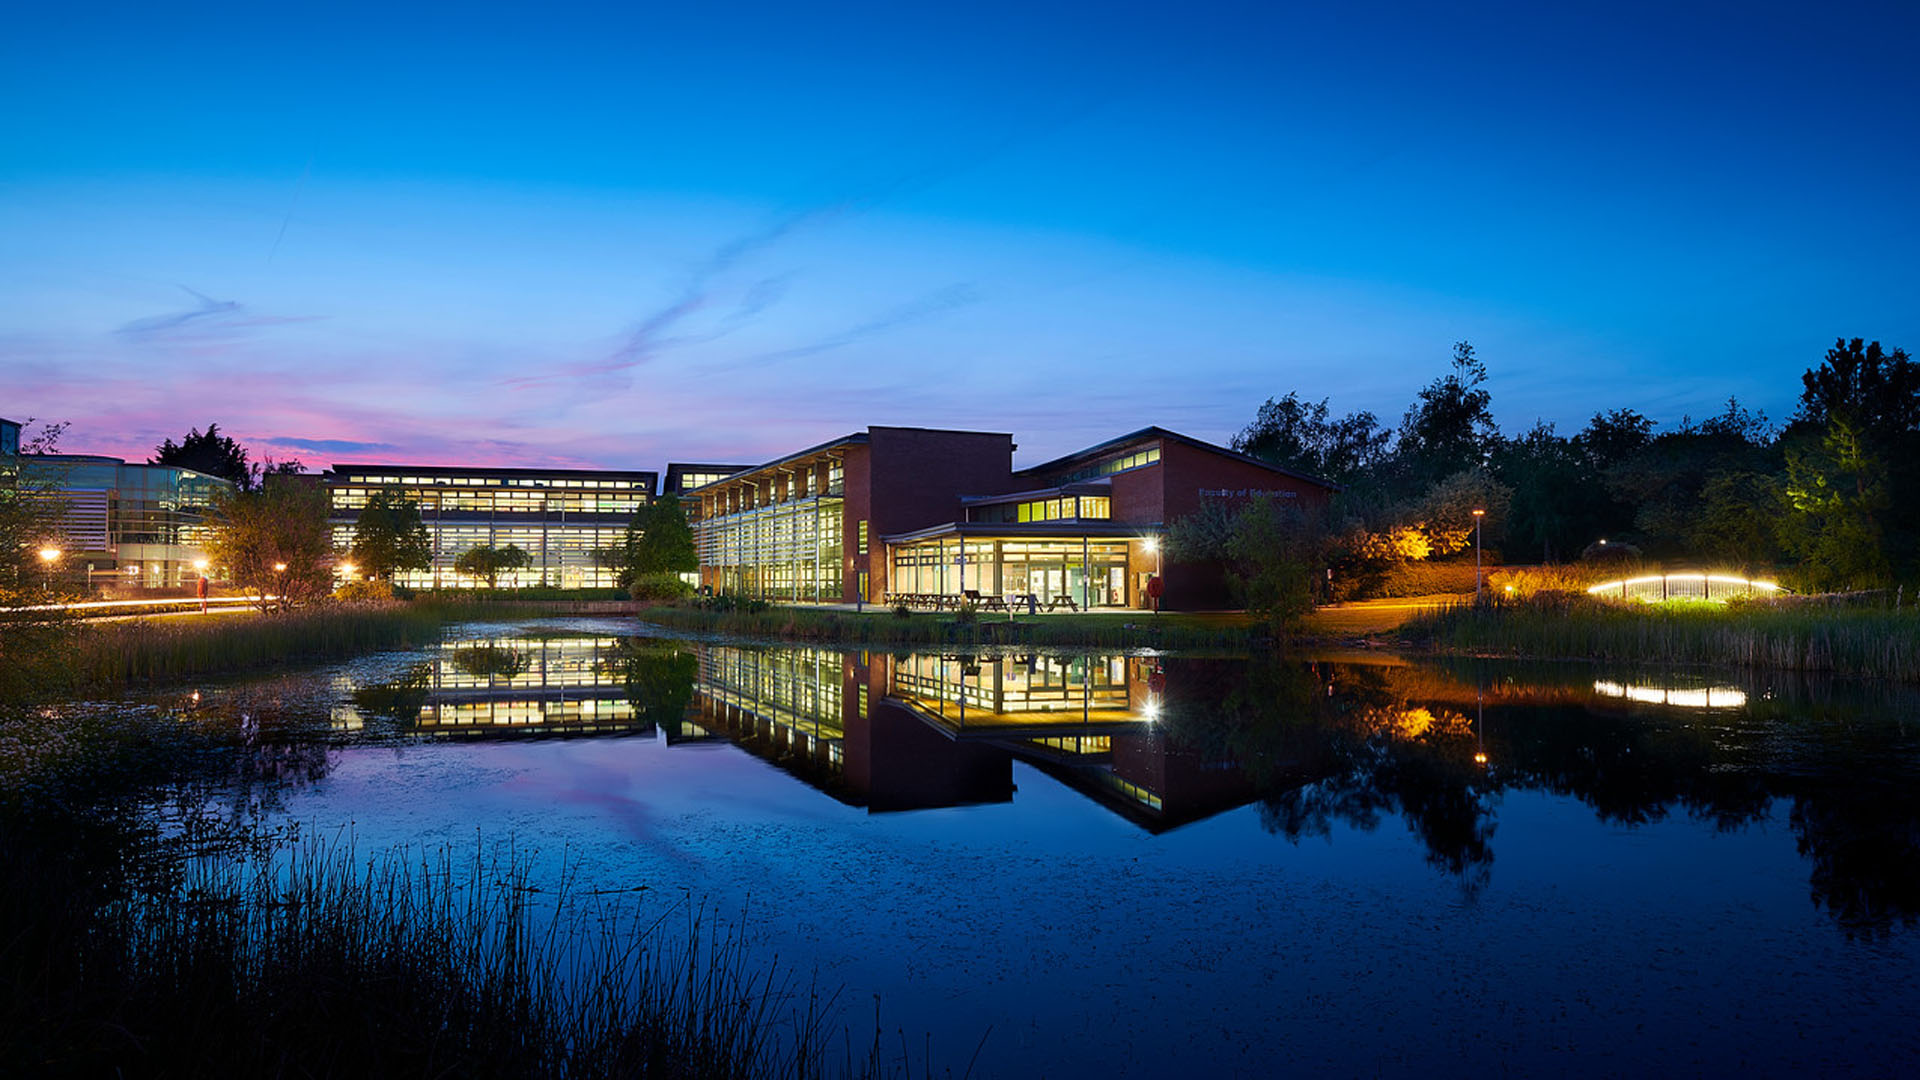 The Faculty of Education photographed from across the lake at night. The building is lit up and the sky is dark blue and pink